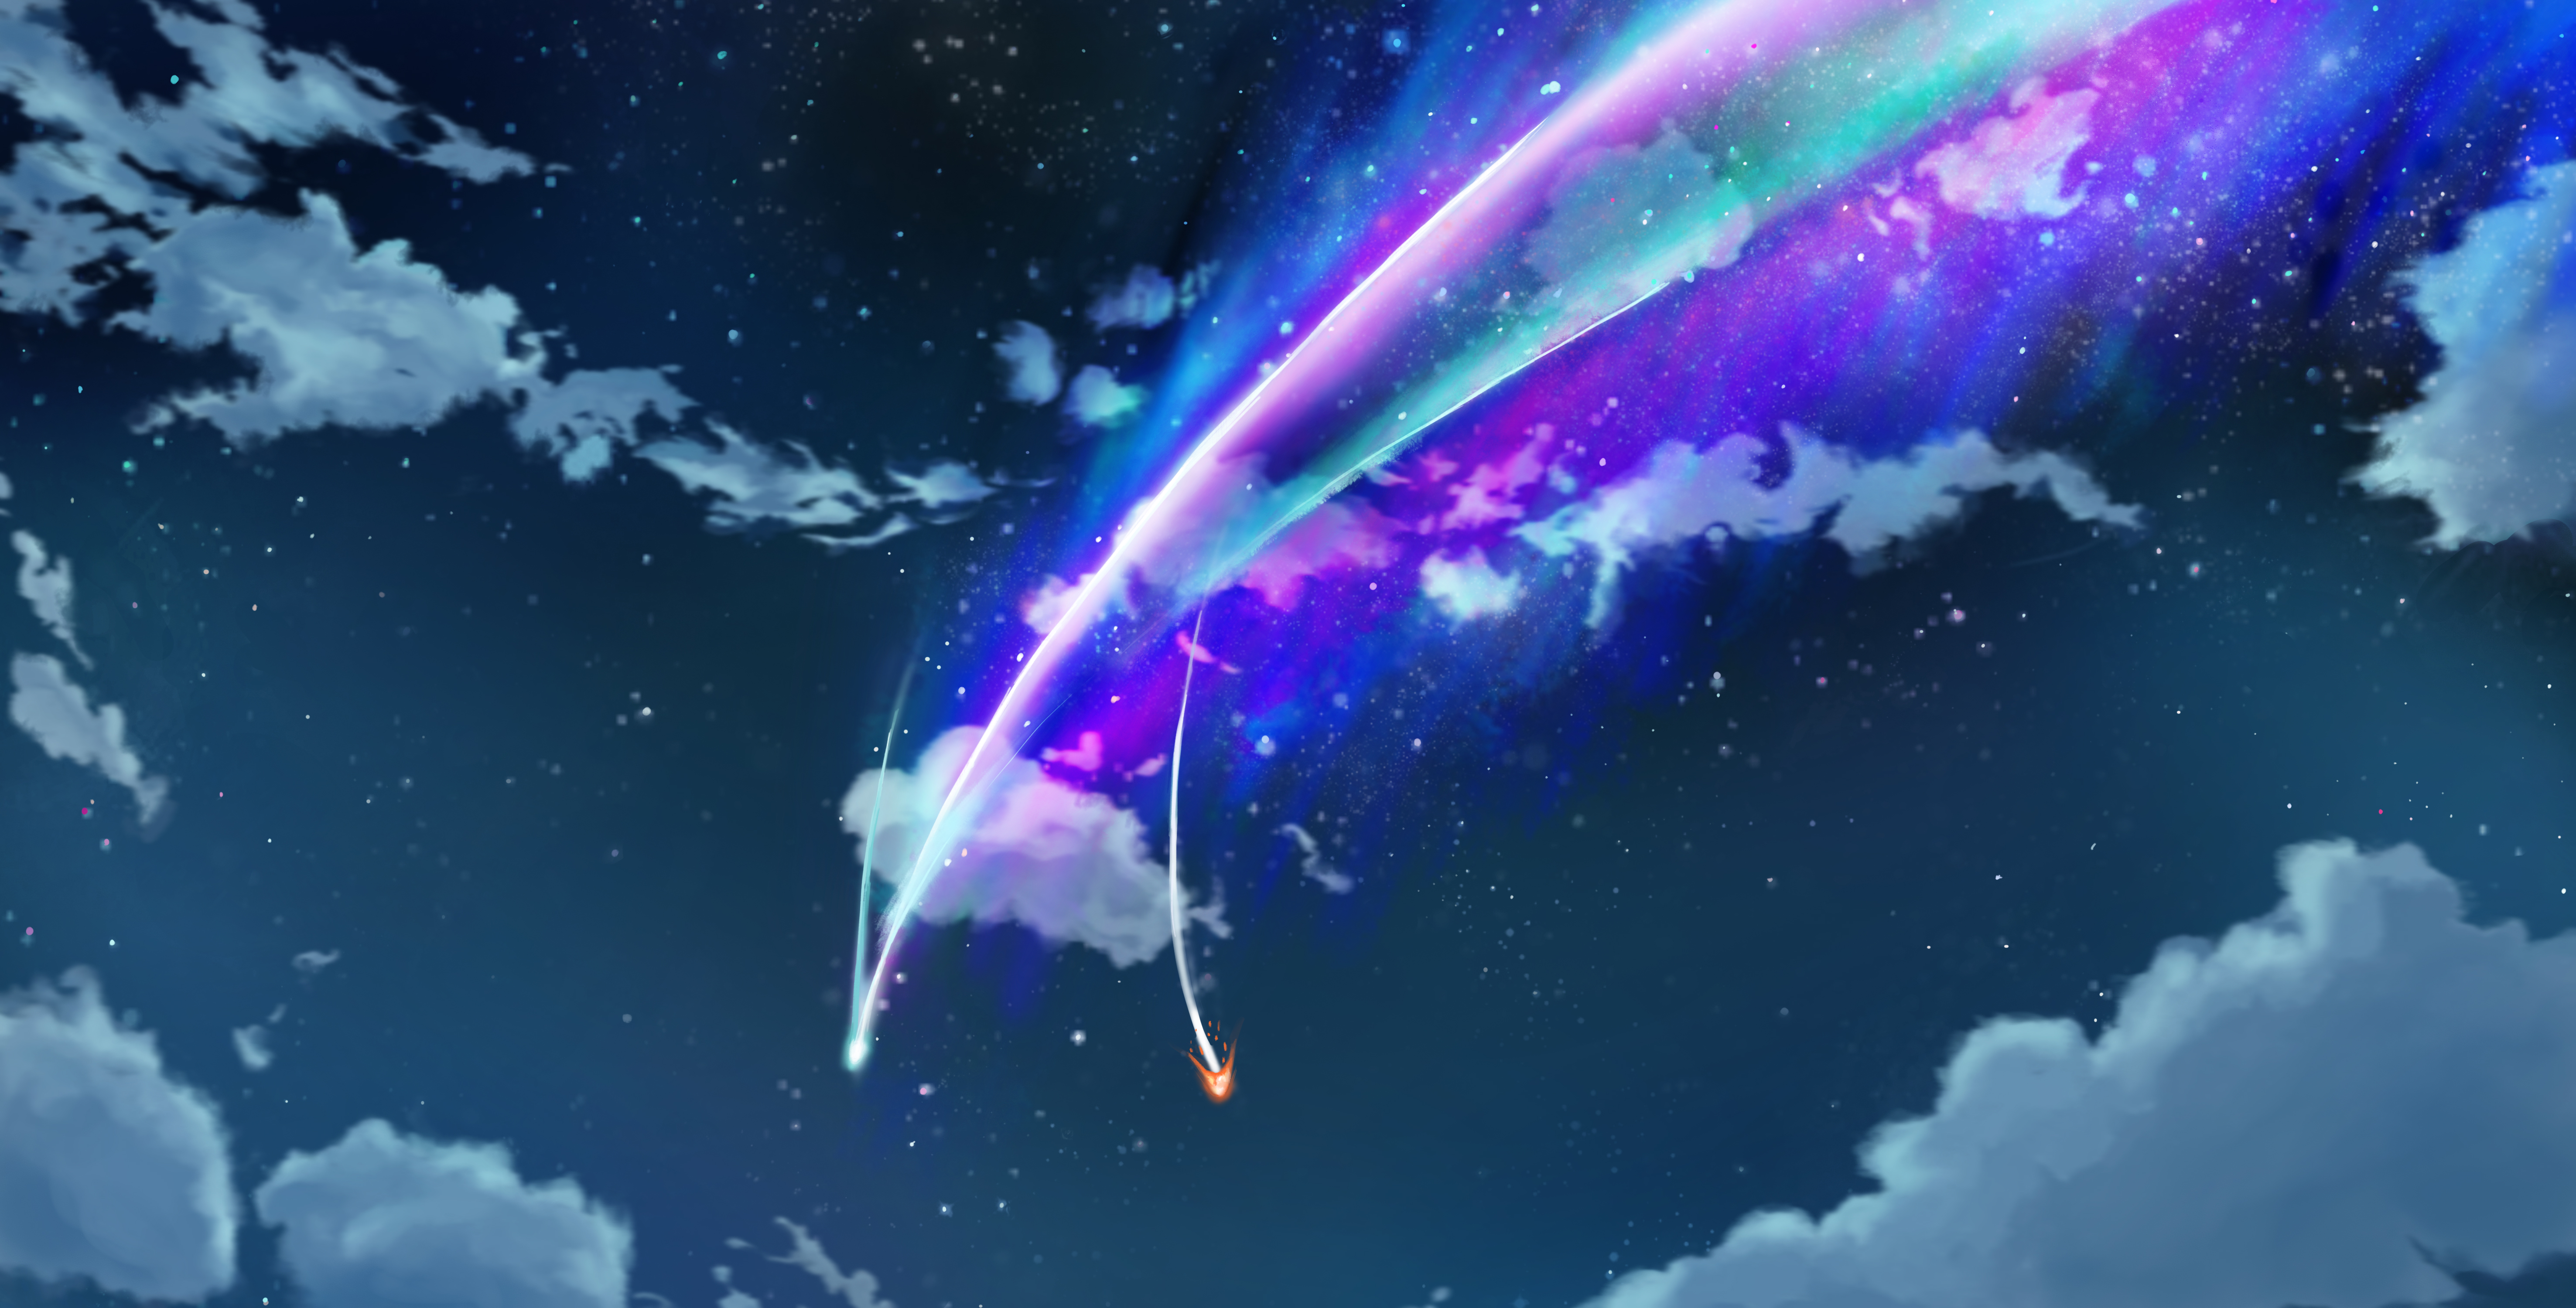 Your Name 5k Retina Ultra Hd Wallpaper Background Image